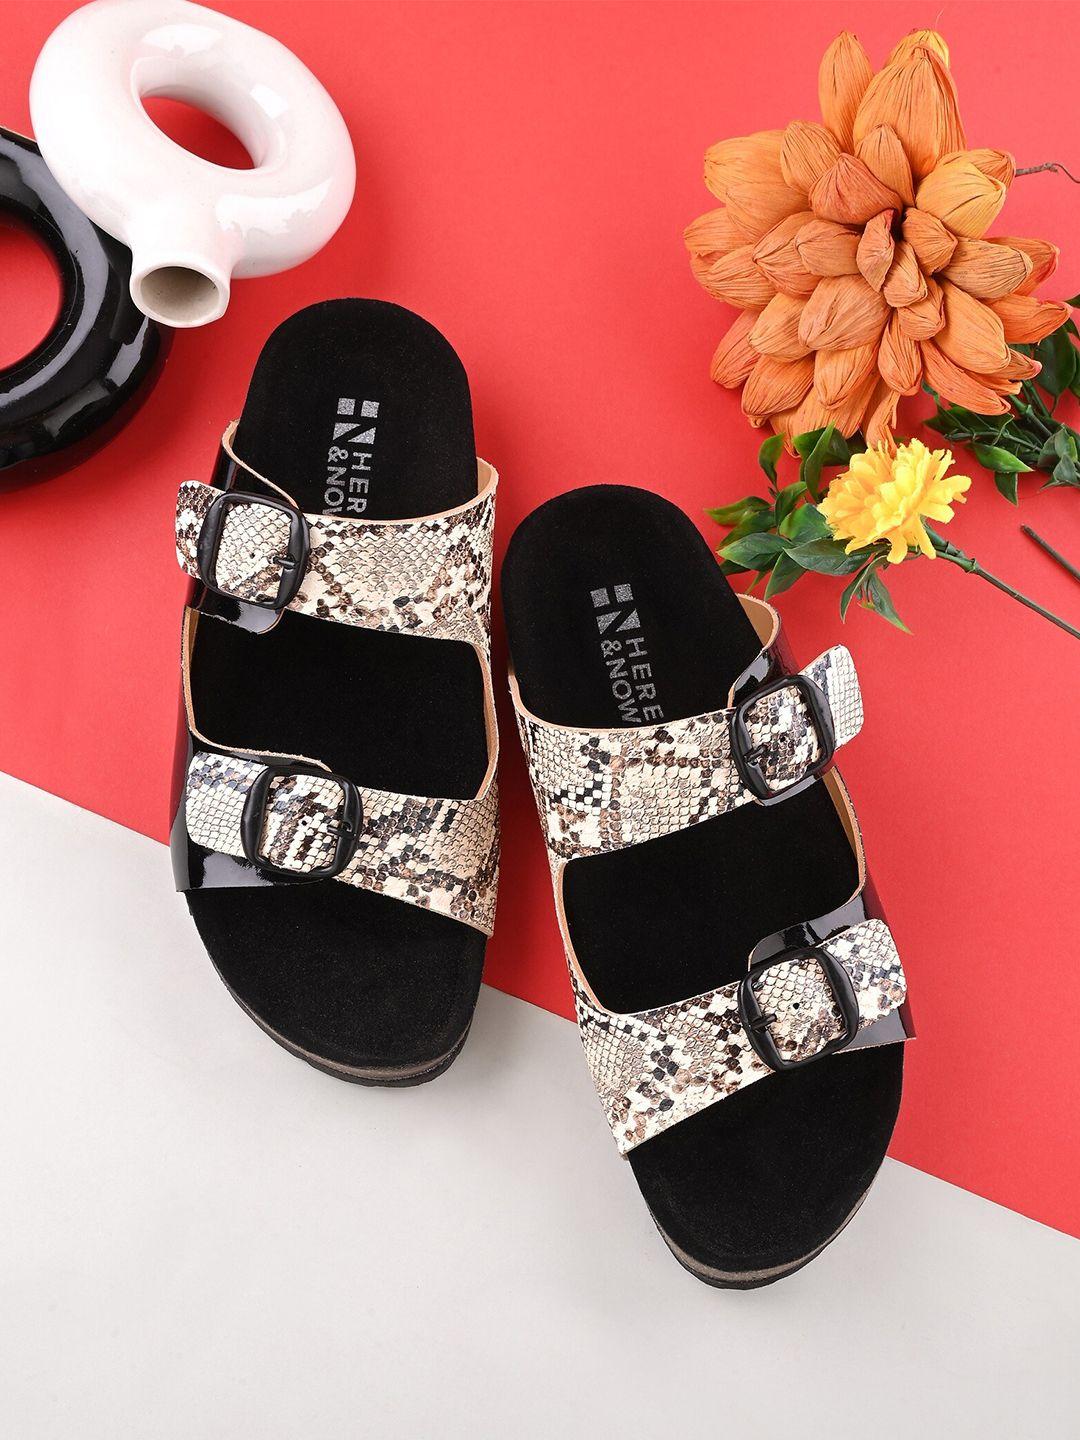 here&now women textured two strap comfort open toe flats with buckle detail